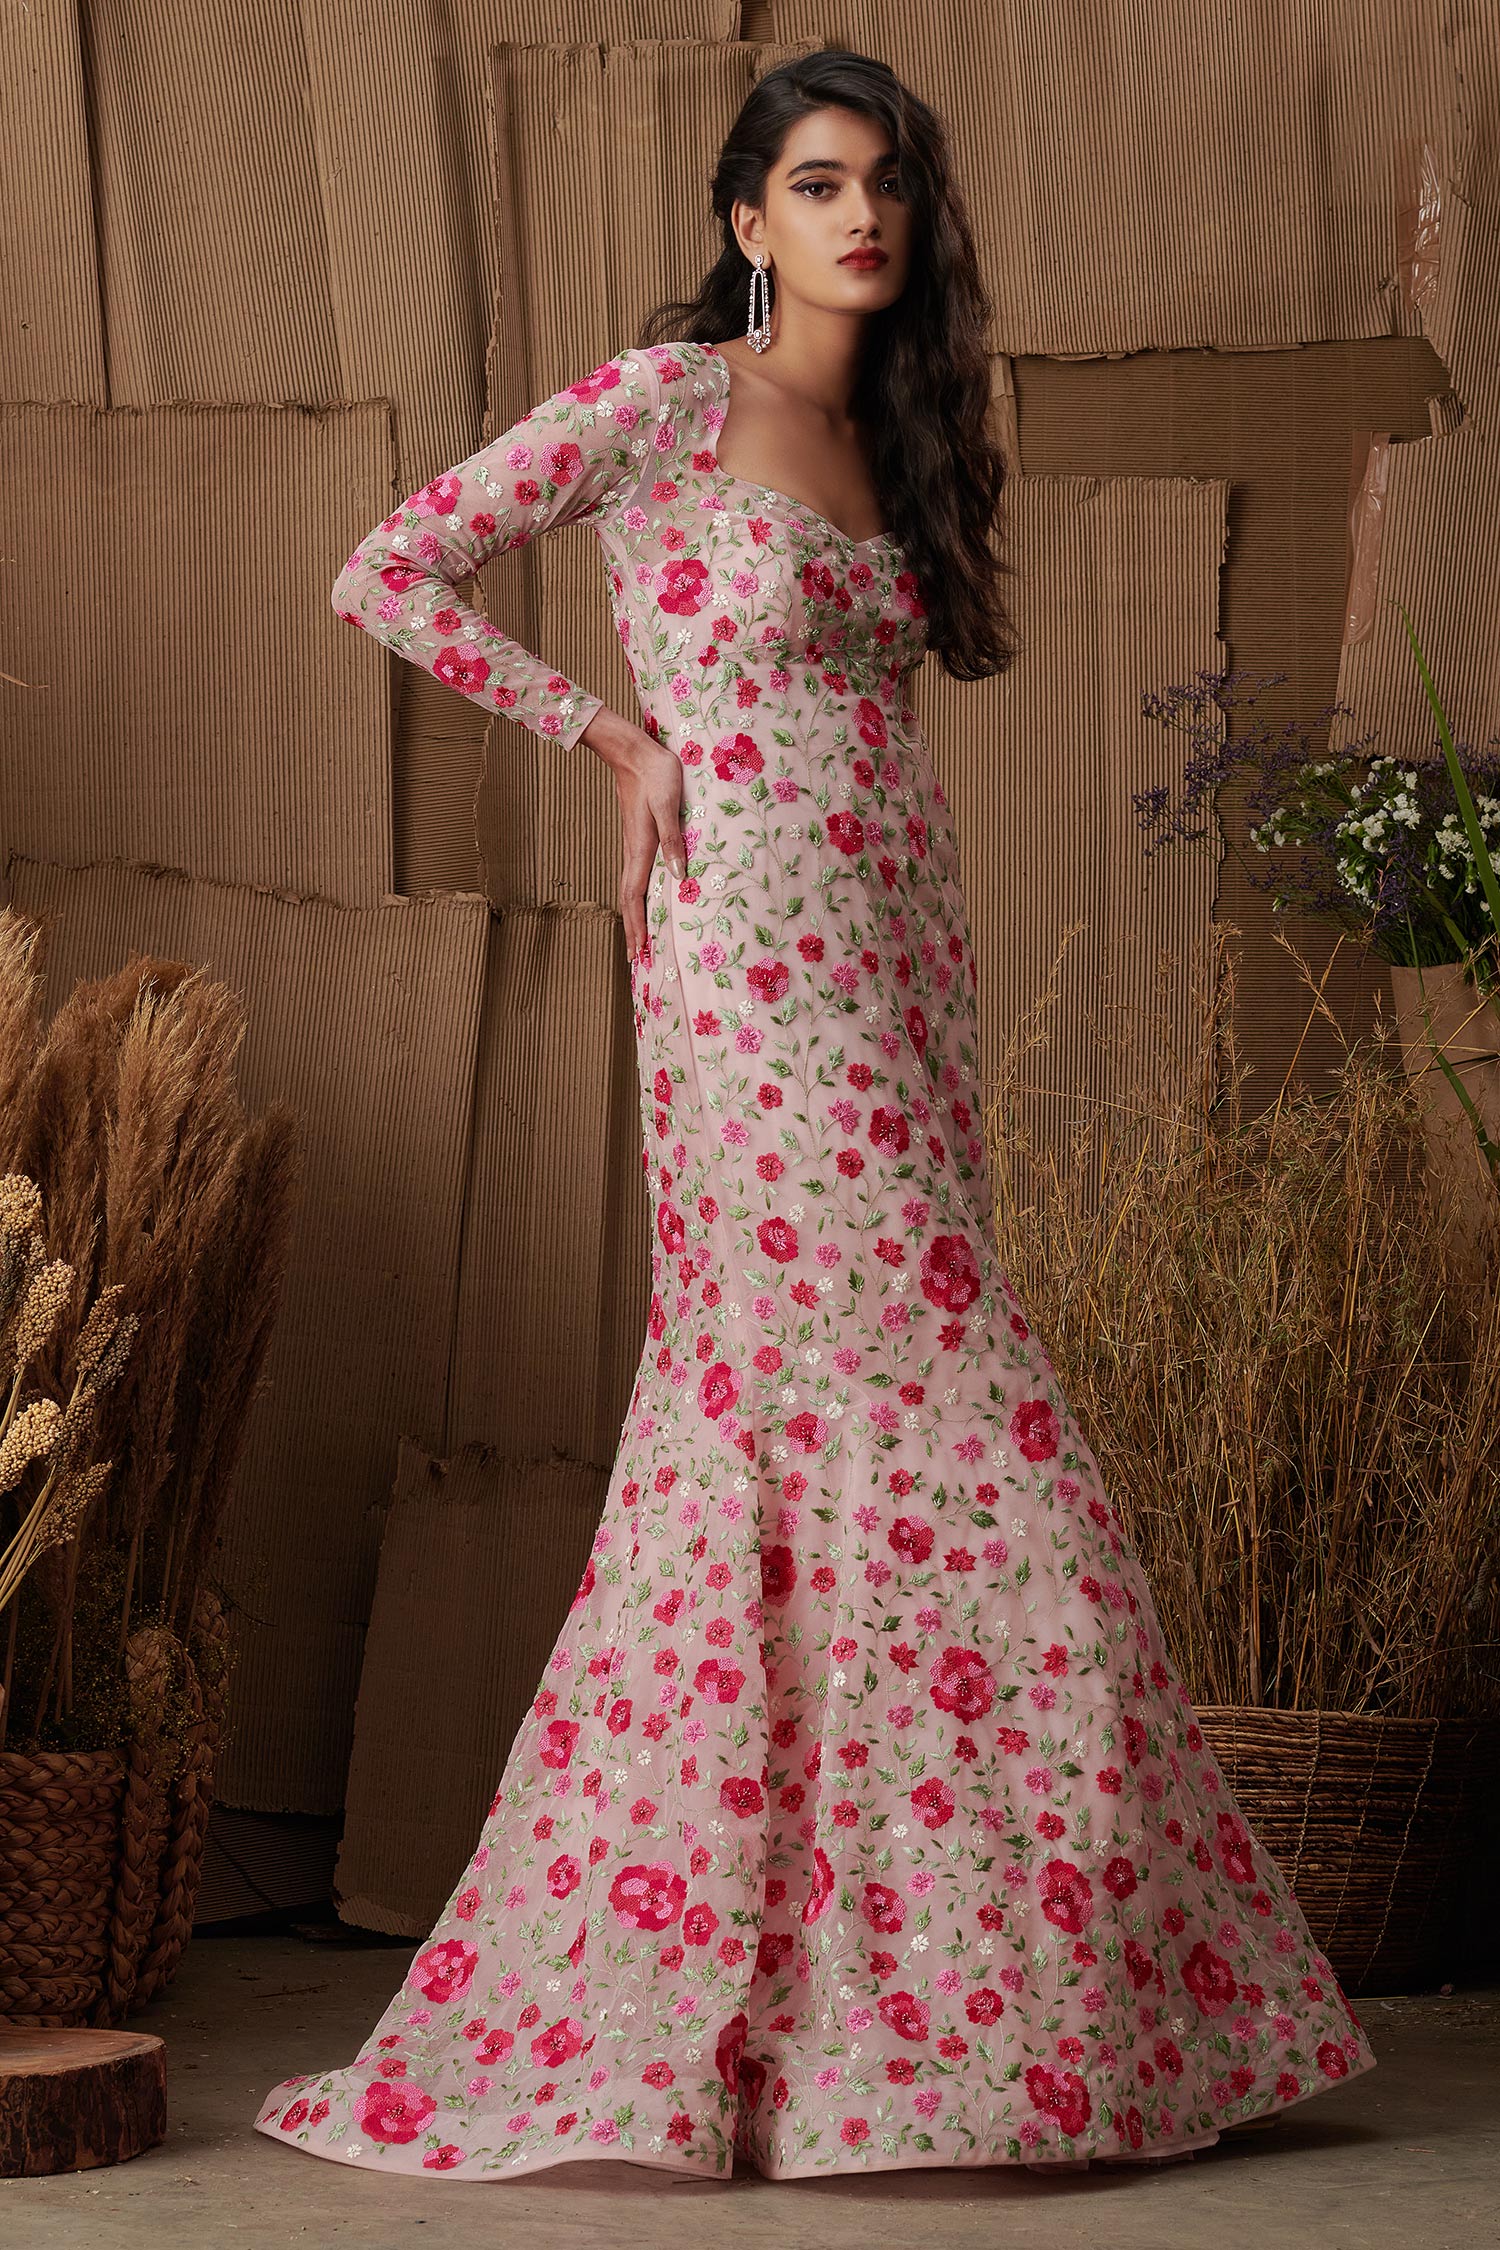 Aggregate more than 82 pink floral evening gown best